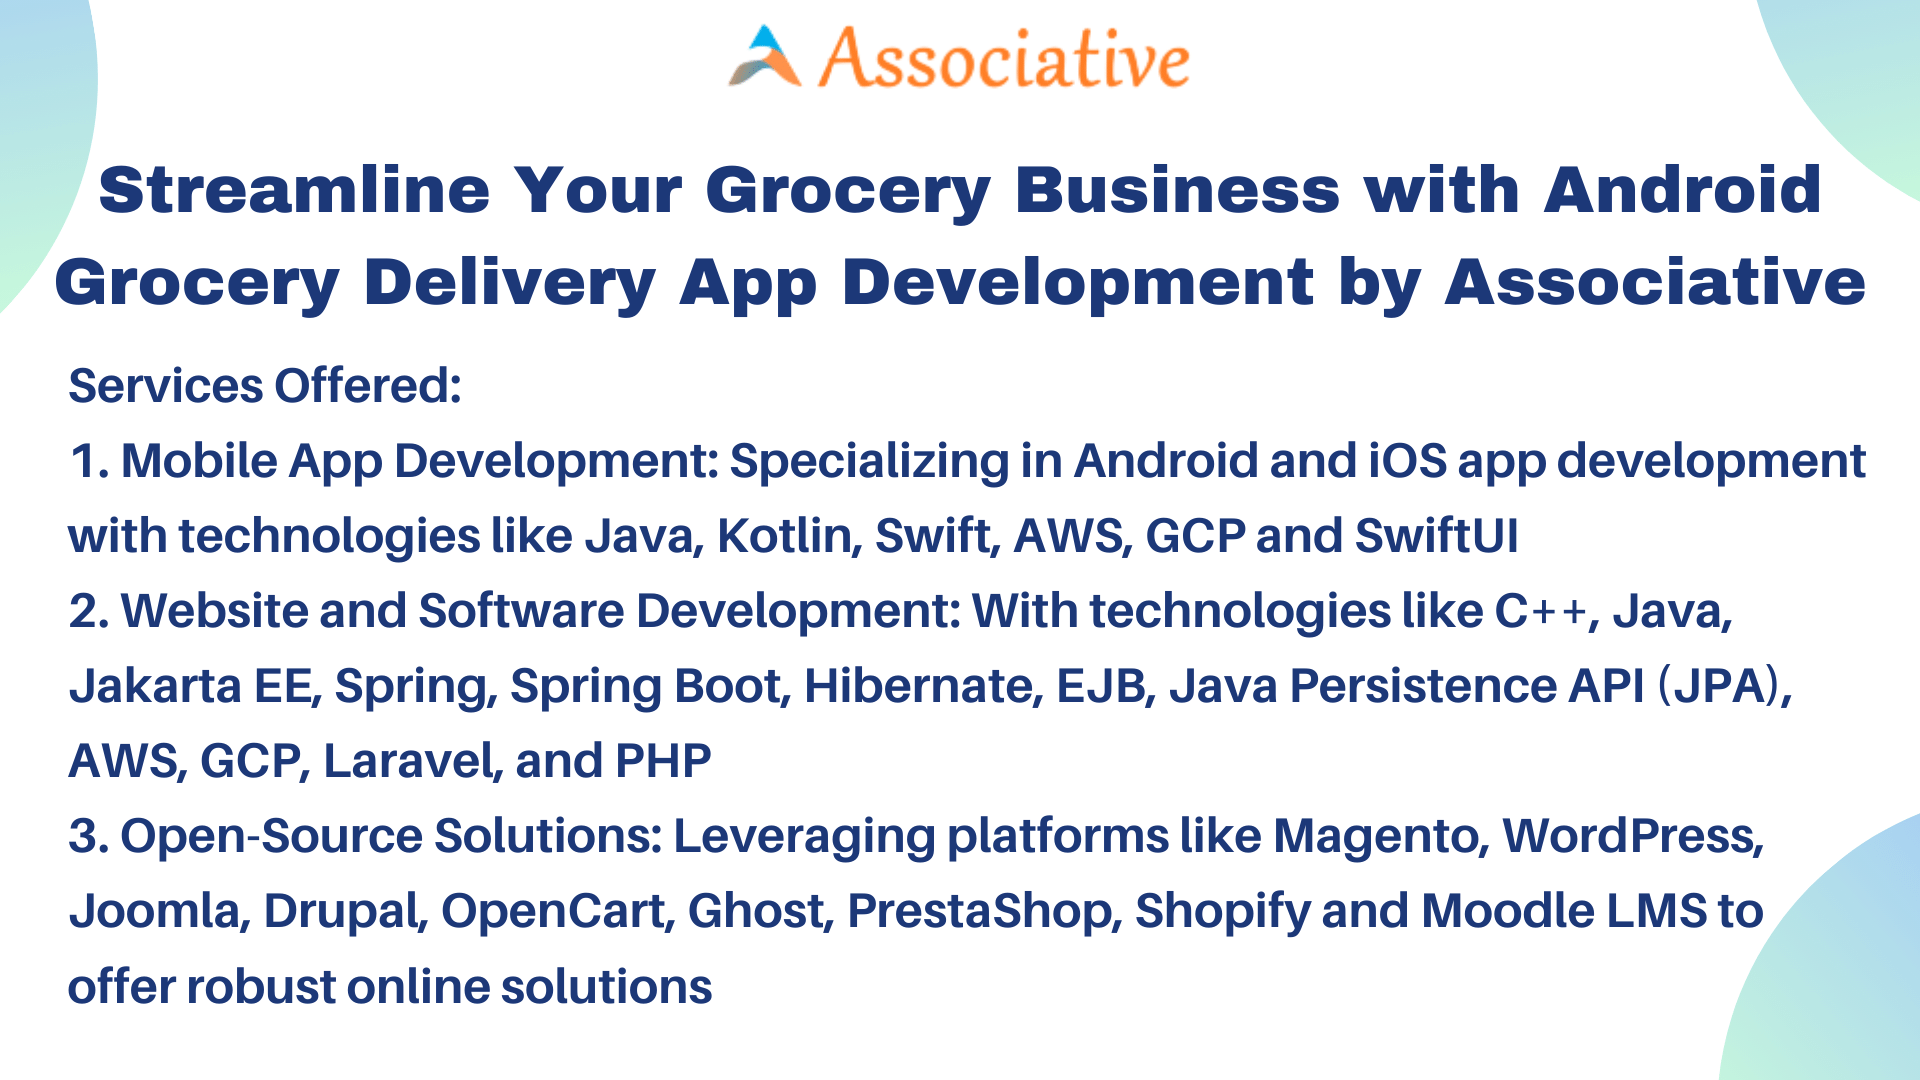 Streamline Your Grocery Business with Android Grocery Delivery App Development by Associative